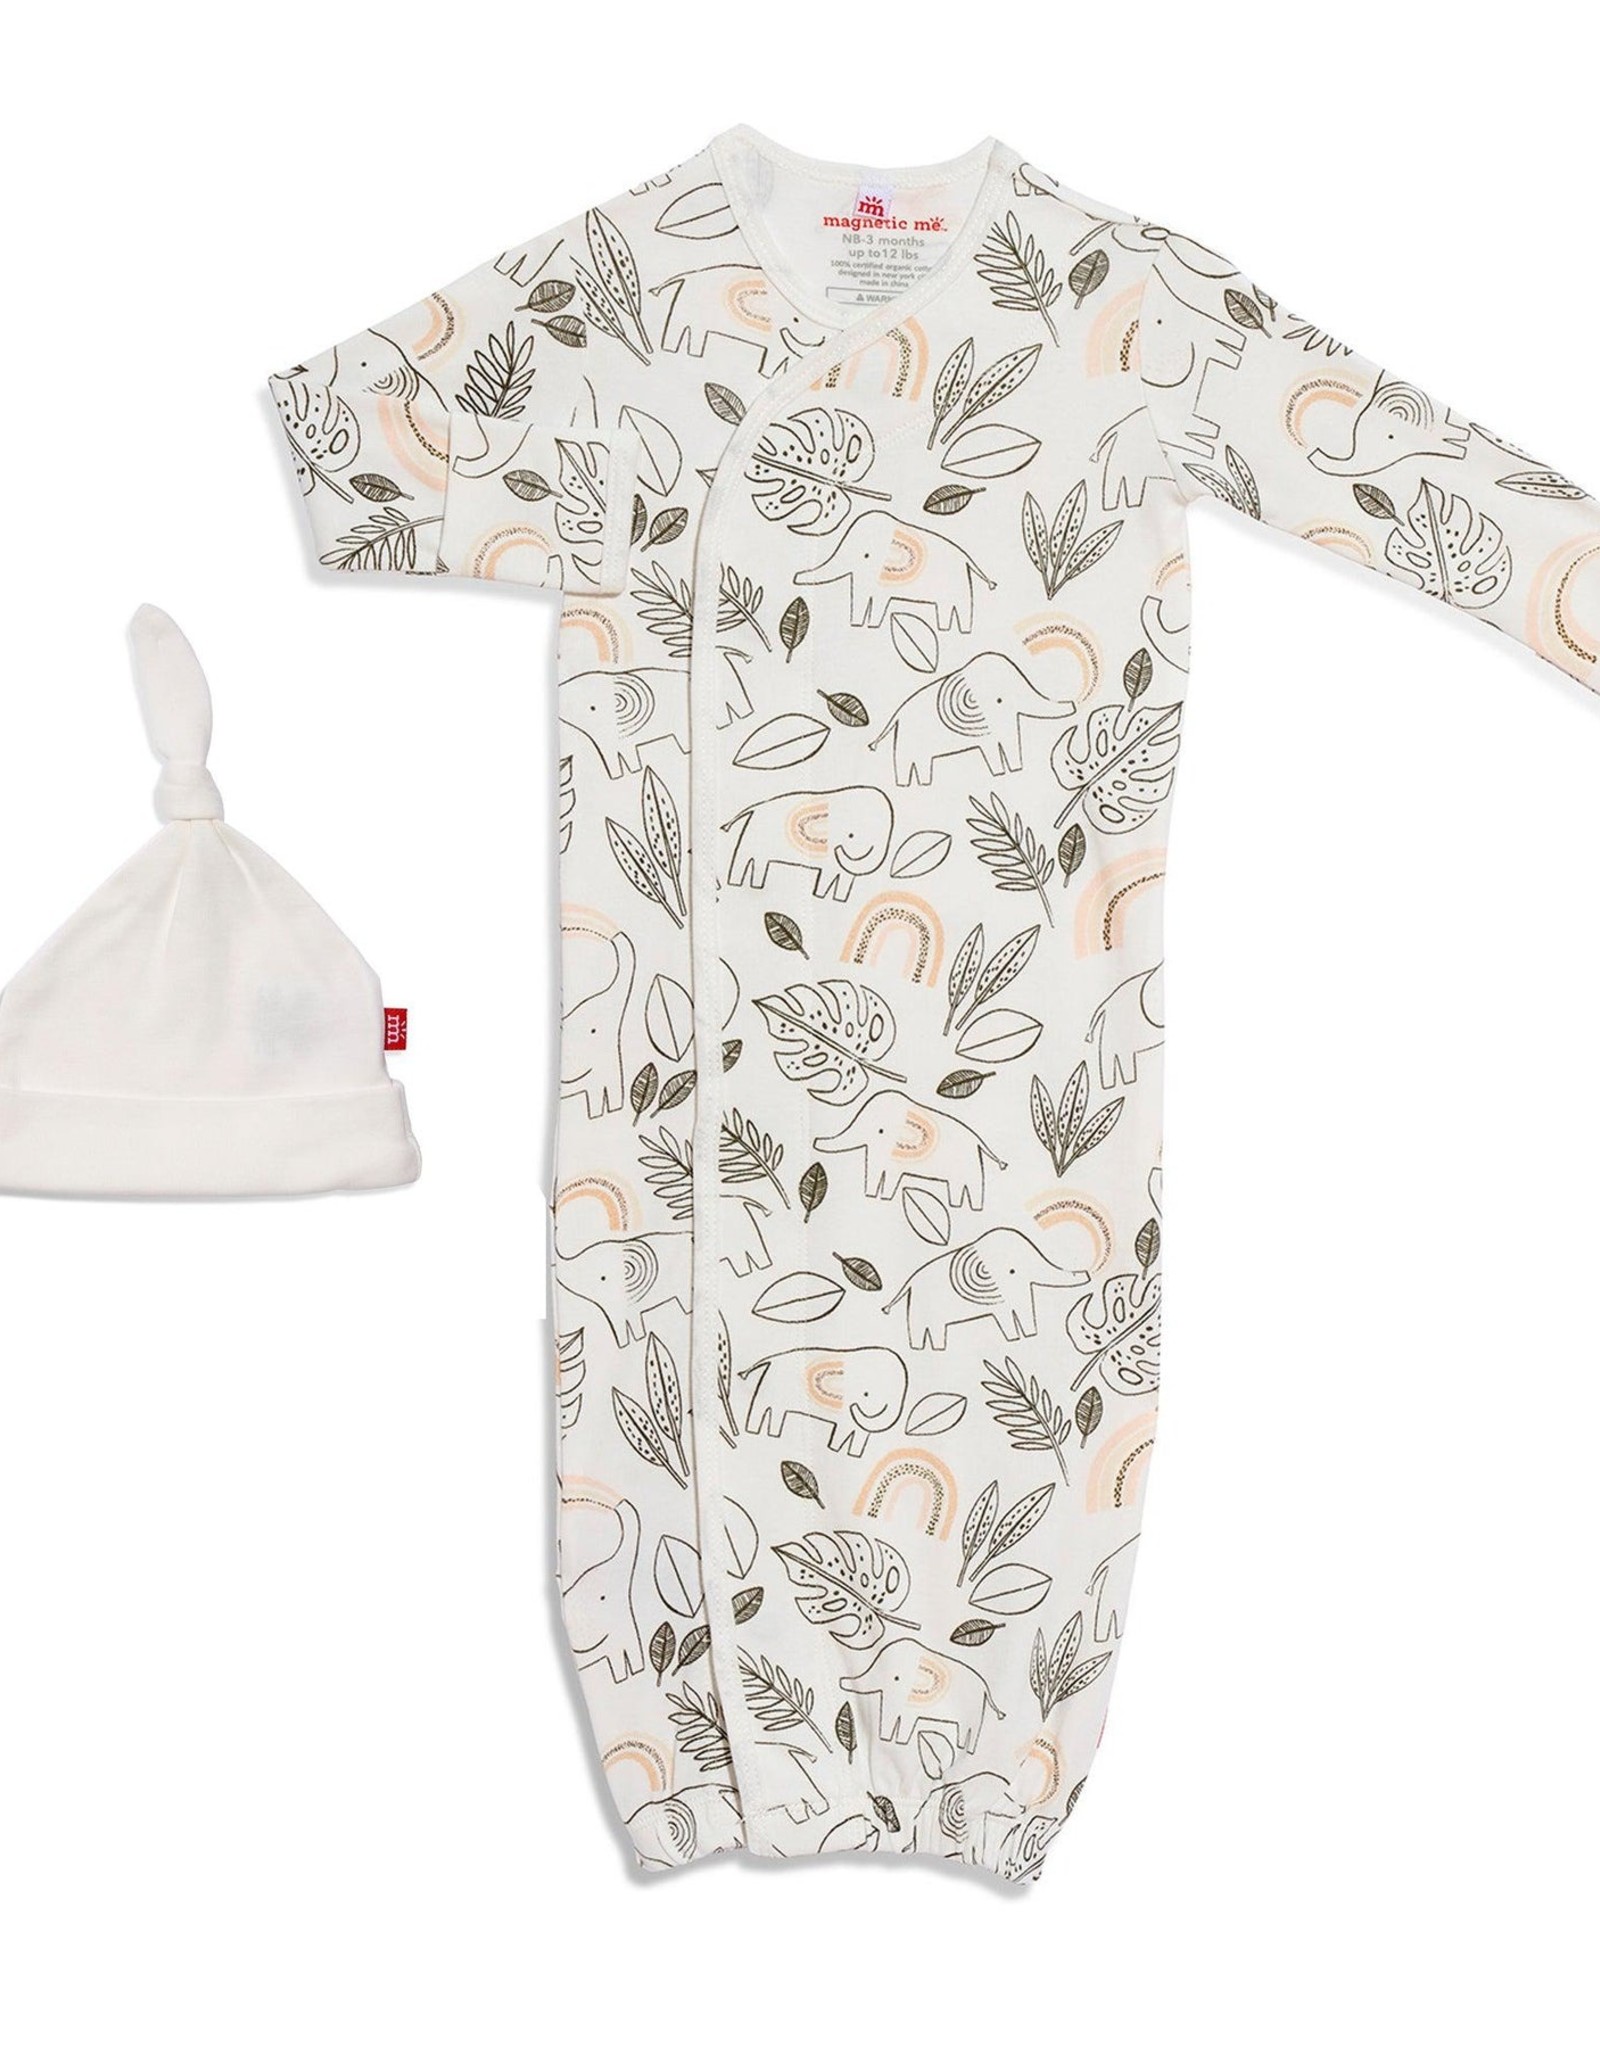 Magnetic Me MM Organic Cotton Gown/Hat Set Ellie Go Lucky Cream